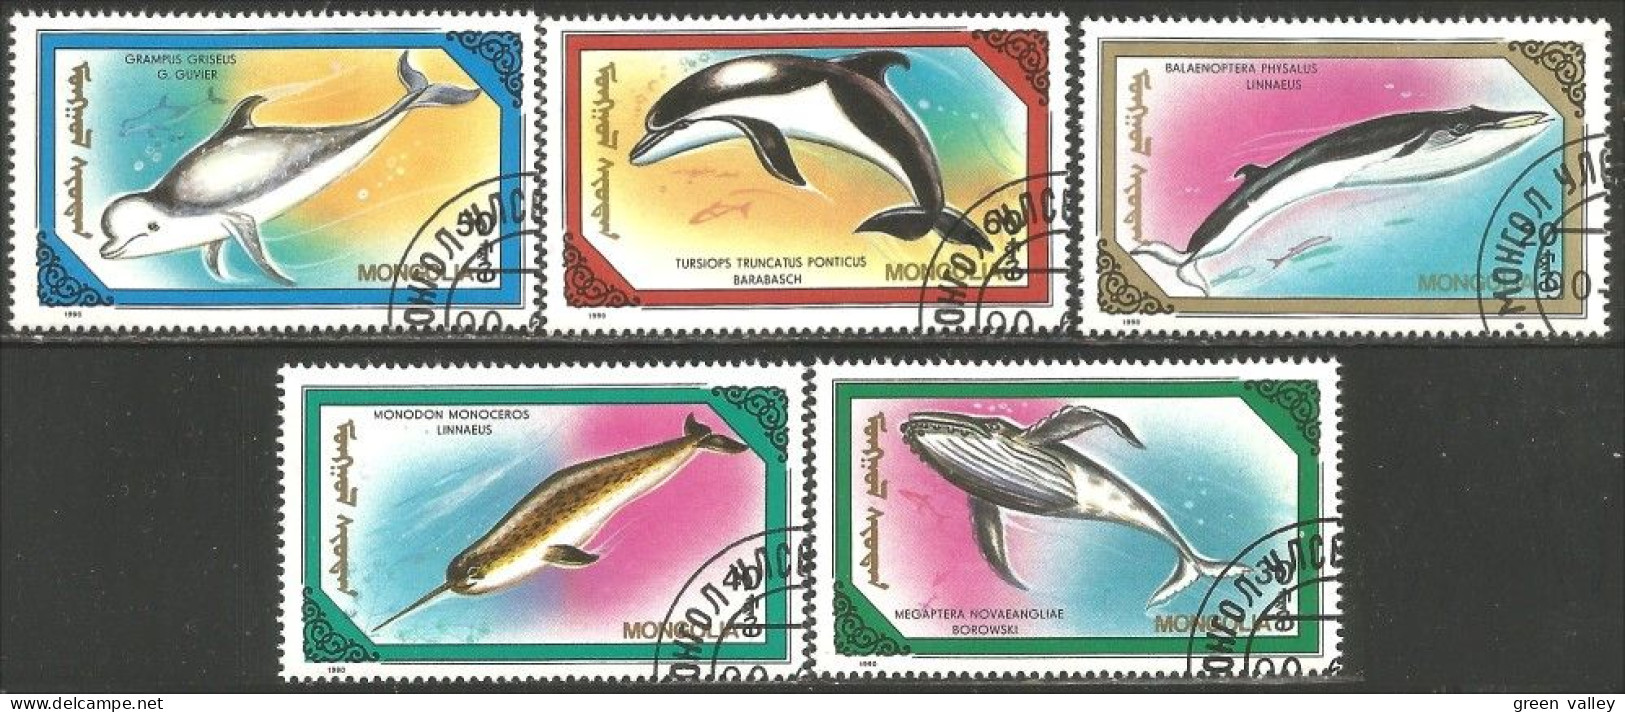 620 Mongolie Baleines Whales Cachalots Balena Capodoglio Ballena Wal Pottwal Dauphins Dolphins Delphin (MNG-76) - Balene